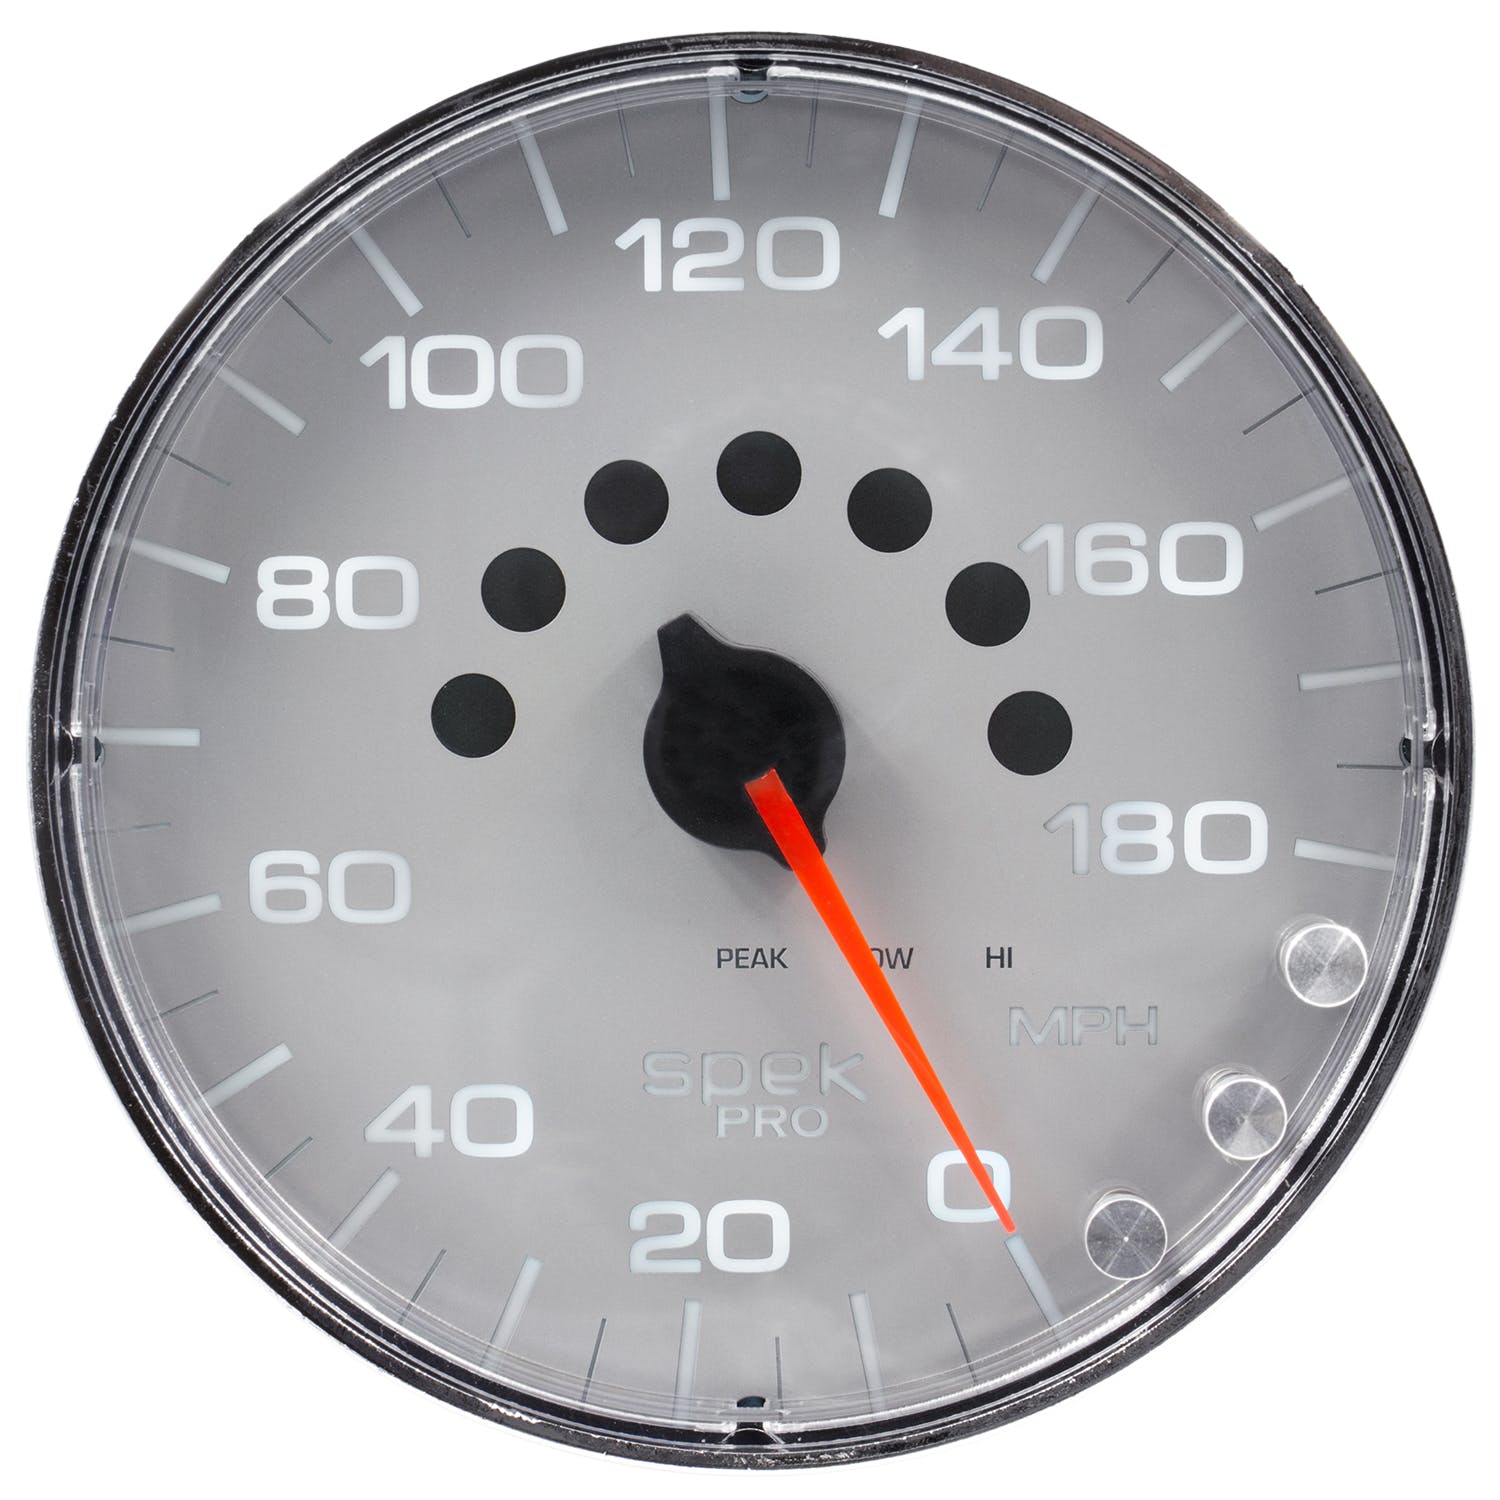 AutoMeter Products P230218 Spek Pro Speedometer Gauge, Electric Programmable Silver/Chrome 5, 180 MPH